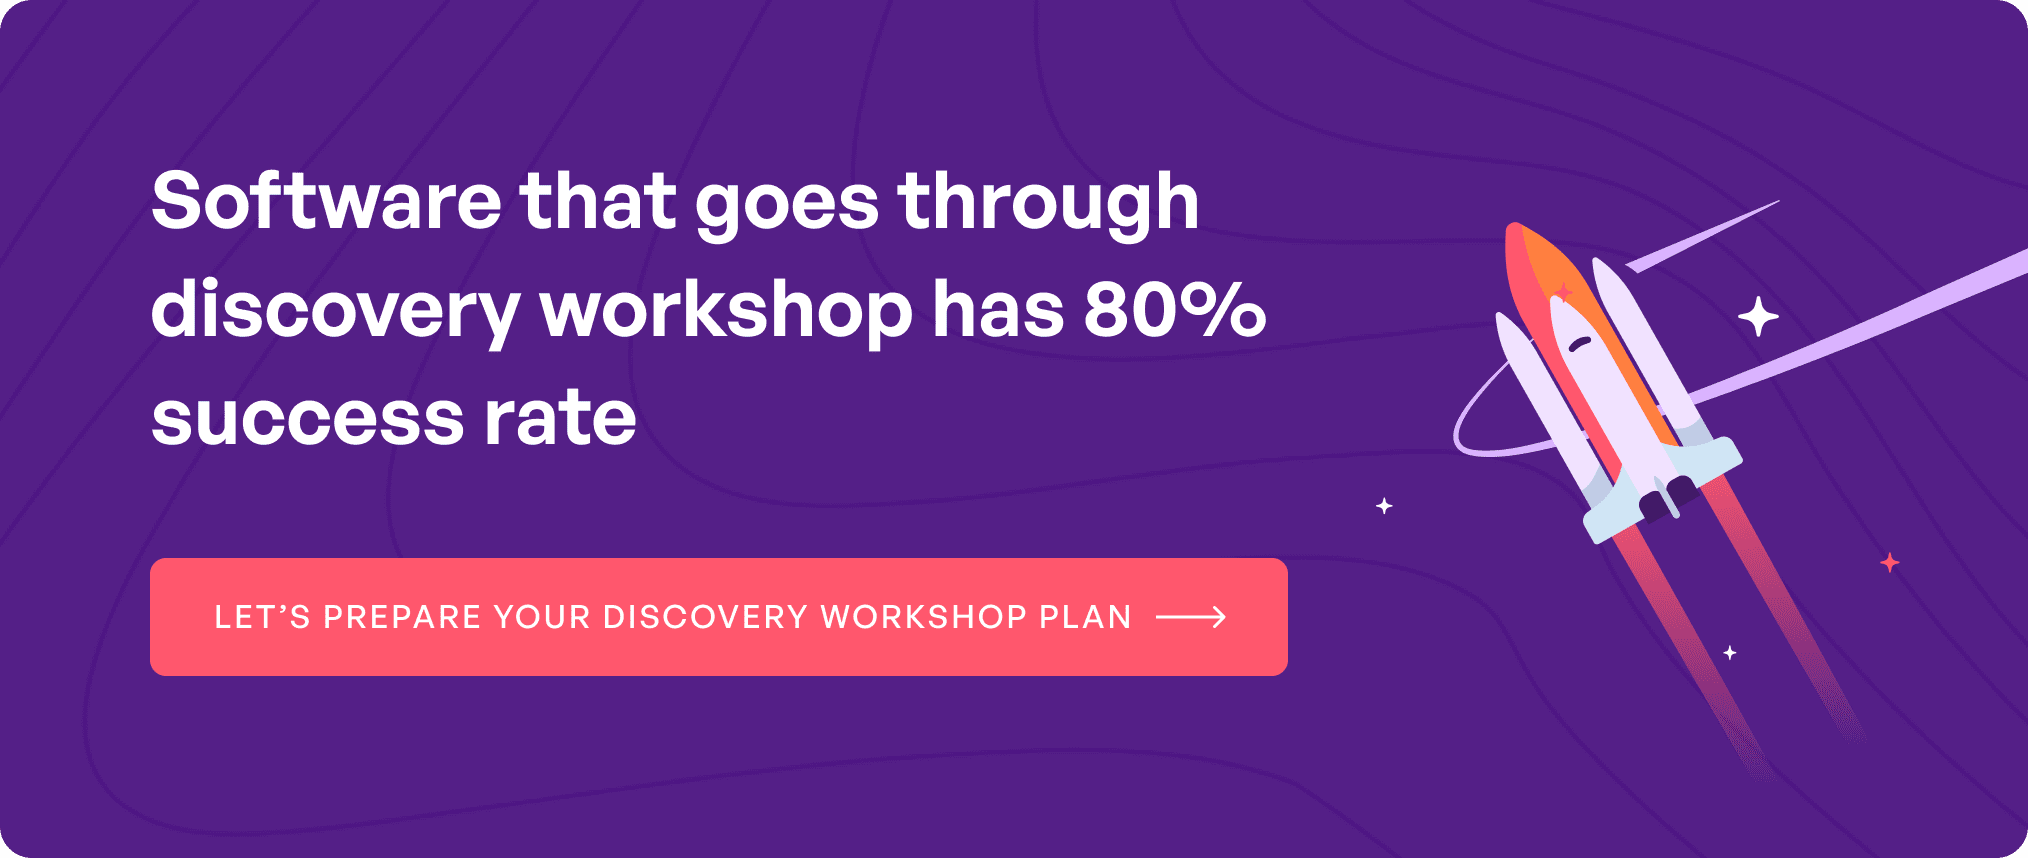 Discovery workshop plan